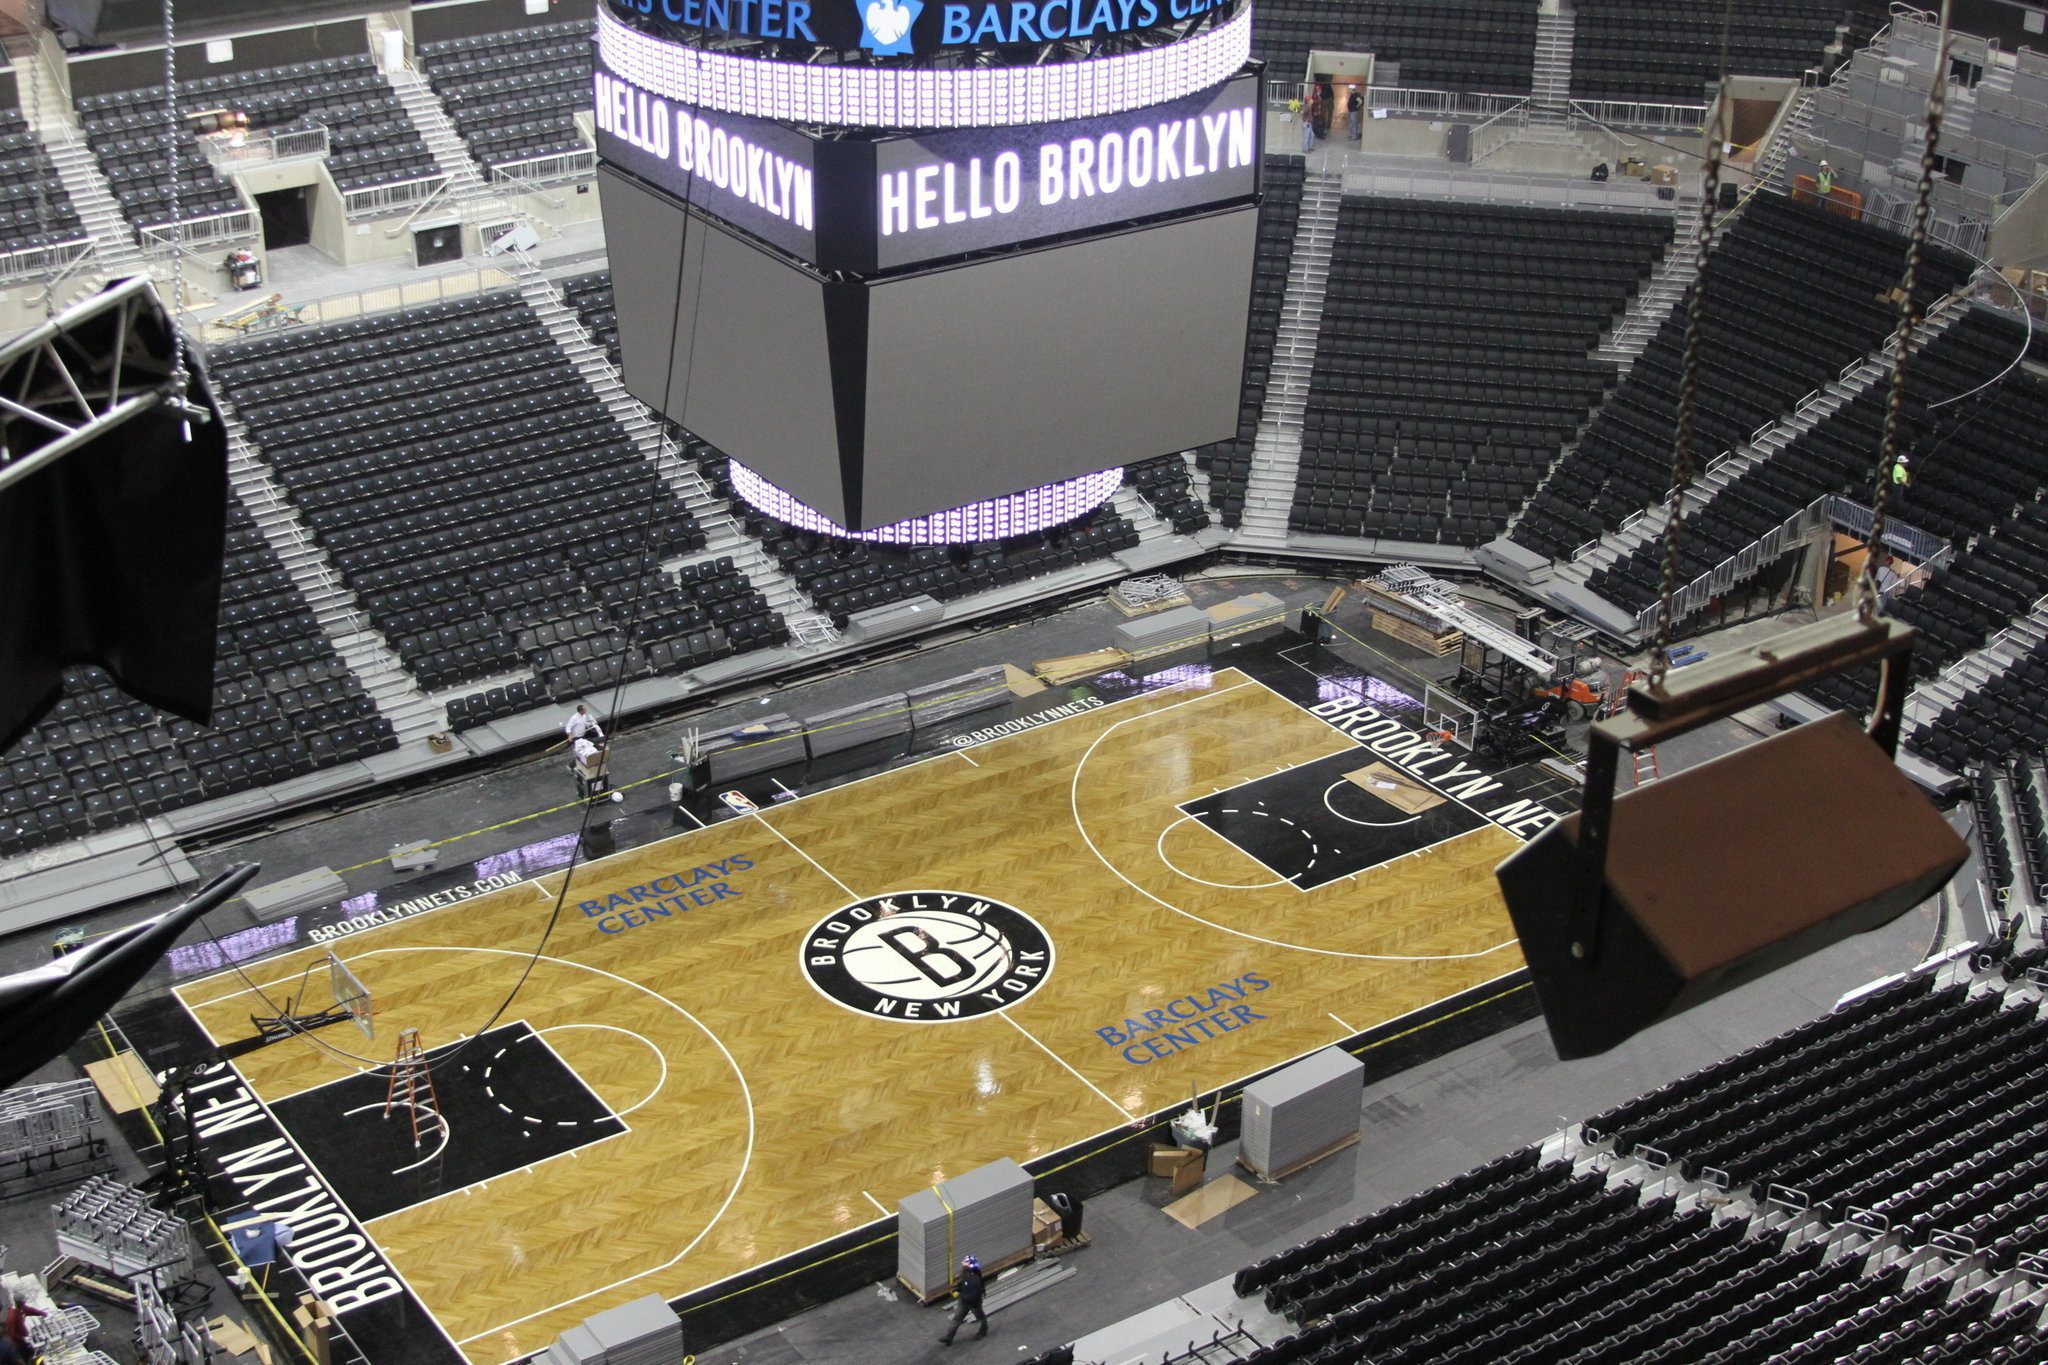 The Barclays Center home of the Brooklyn Nets